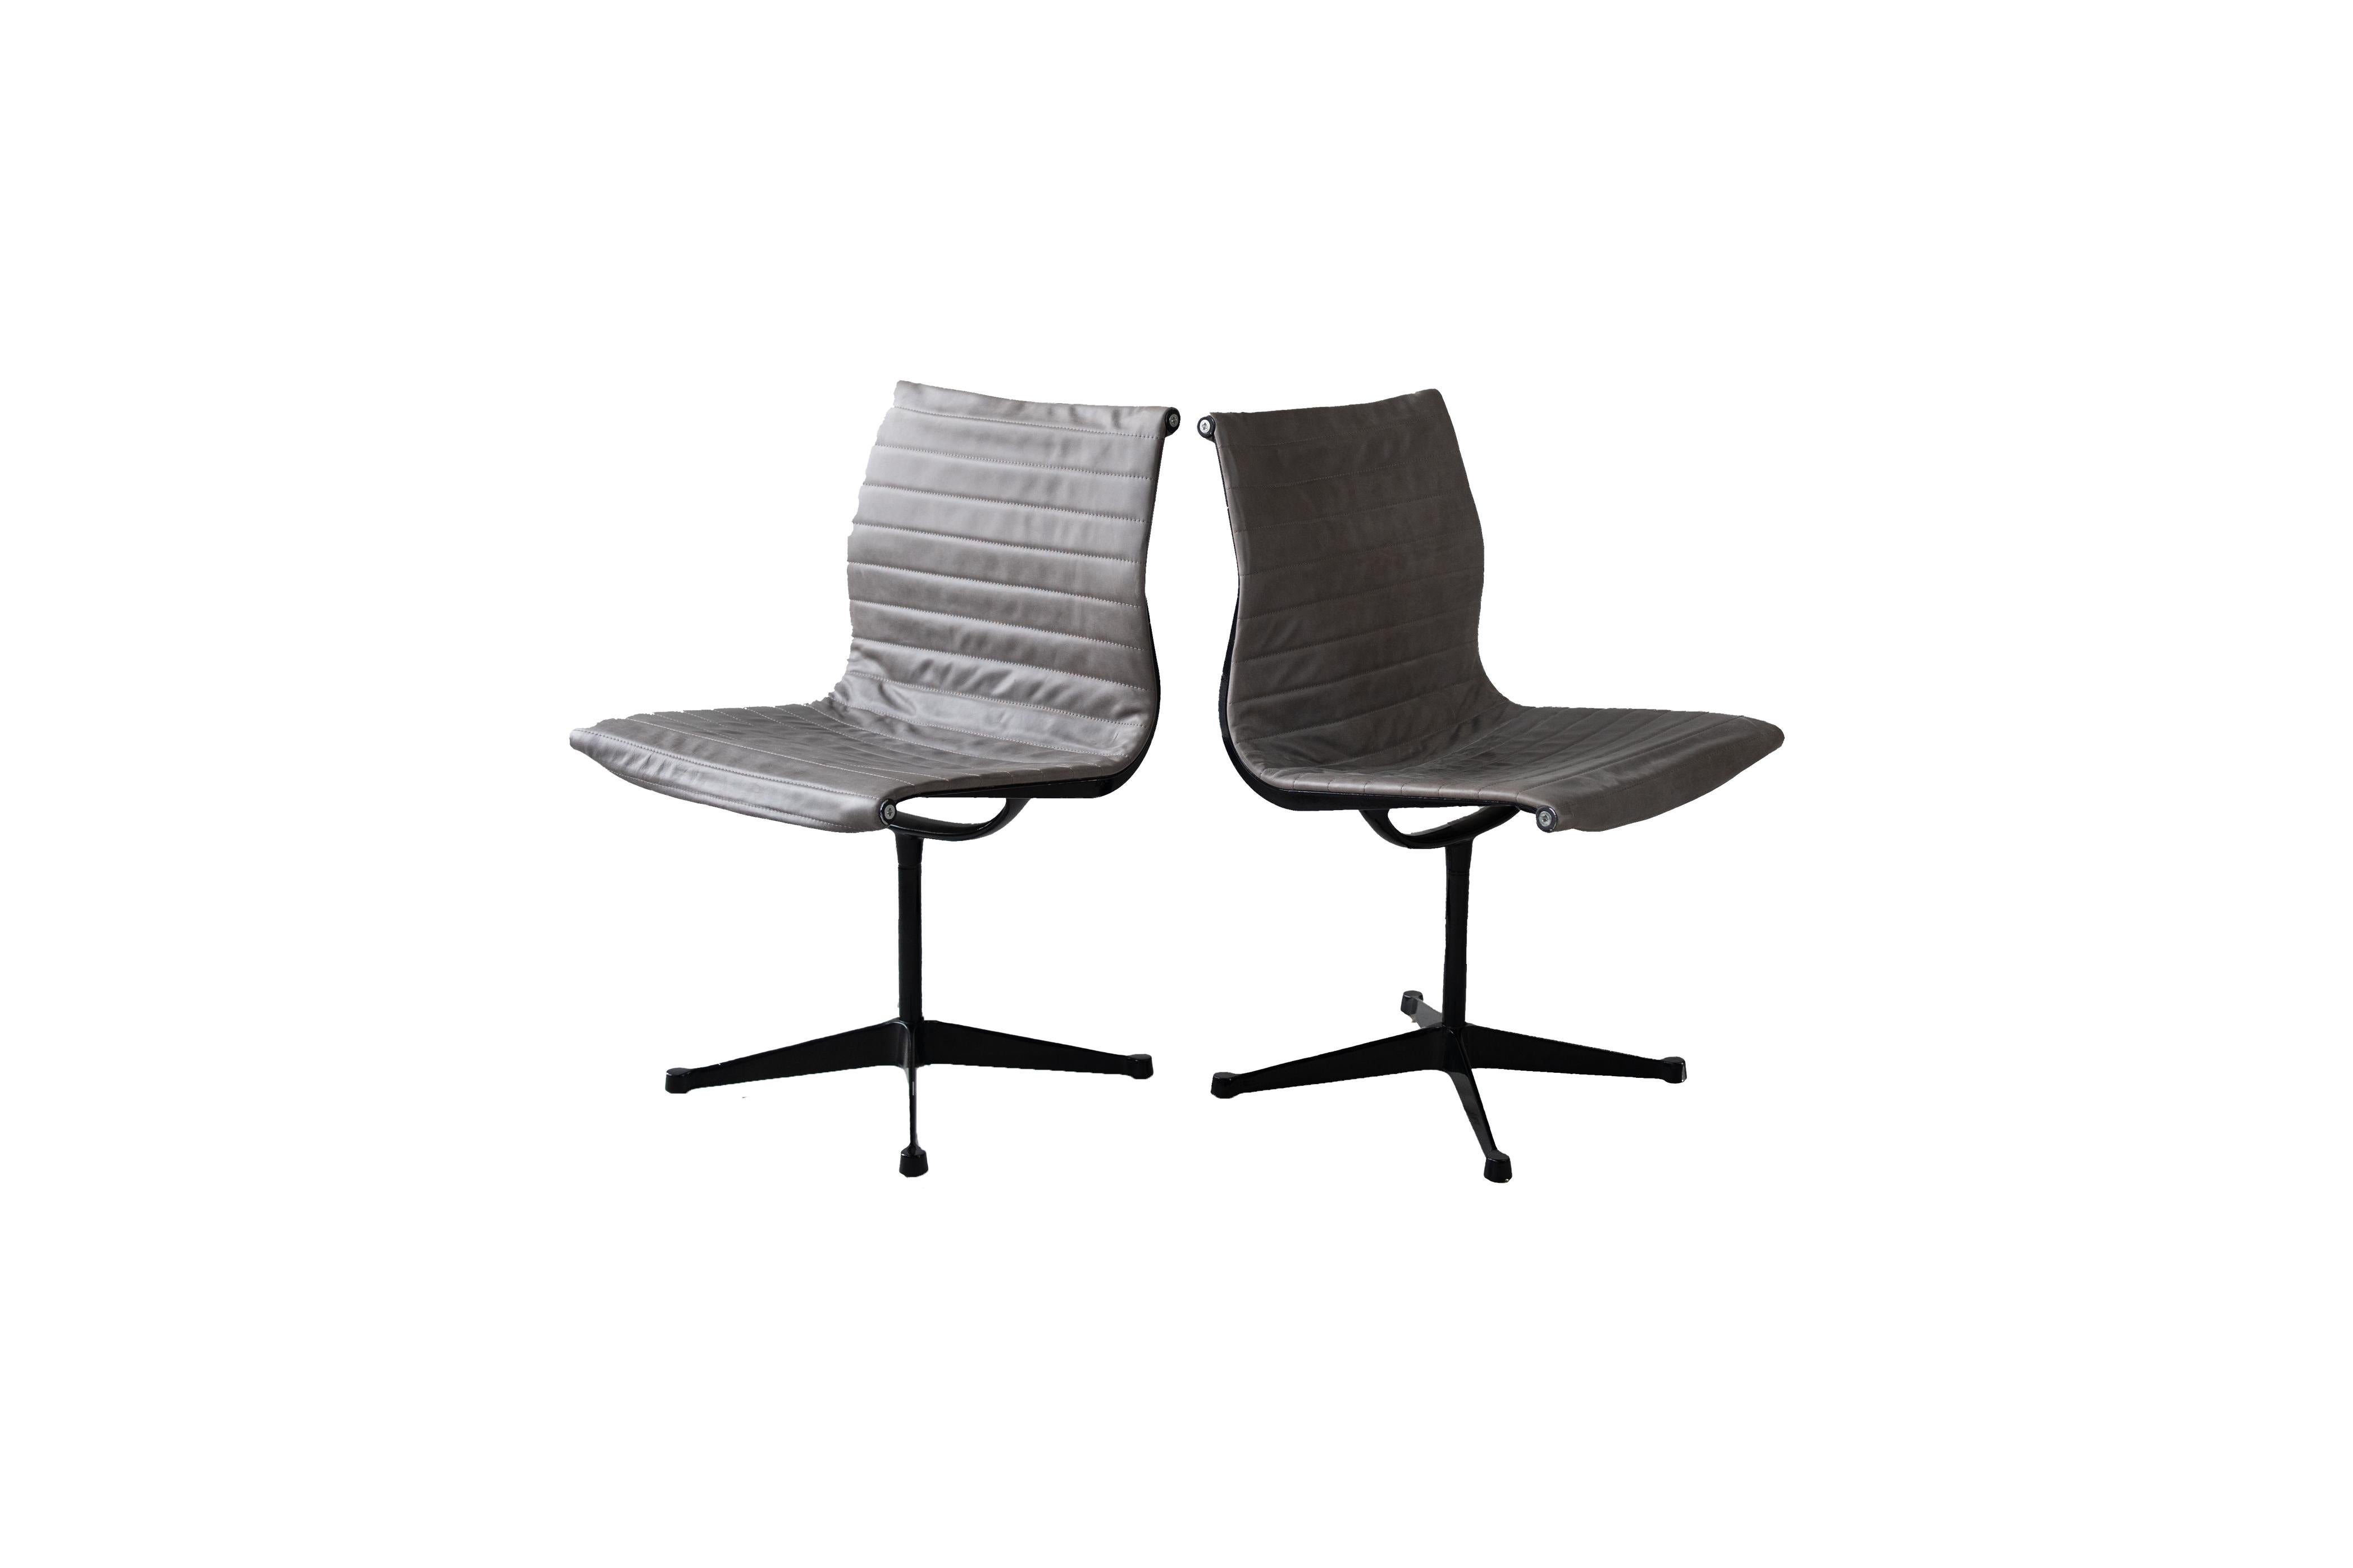 American Aluminium chair by Charles and Ray Eames, set of 2 chairs For Sale